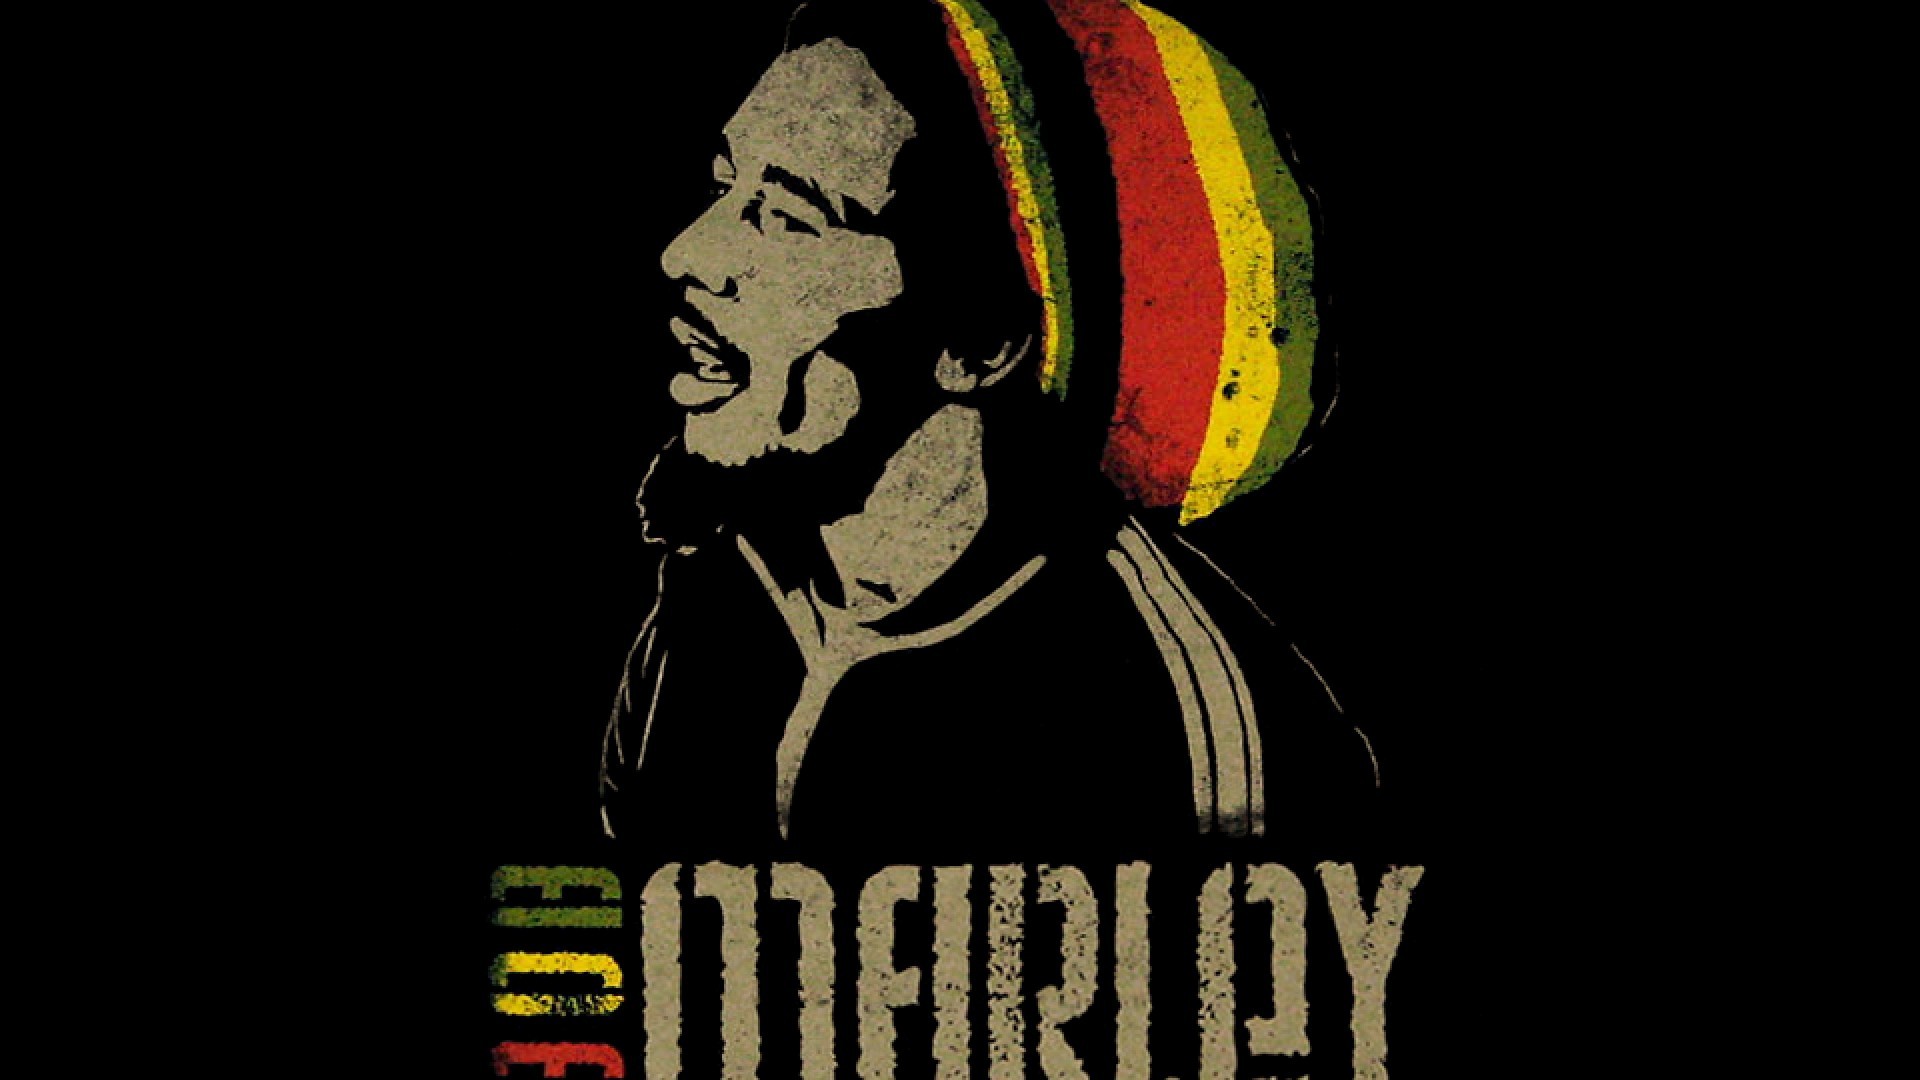 1920x1080 Related Wallpapers from Browning Wallpaper. Images for Gt Reggae Iphone  Wallpaper